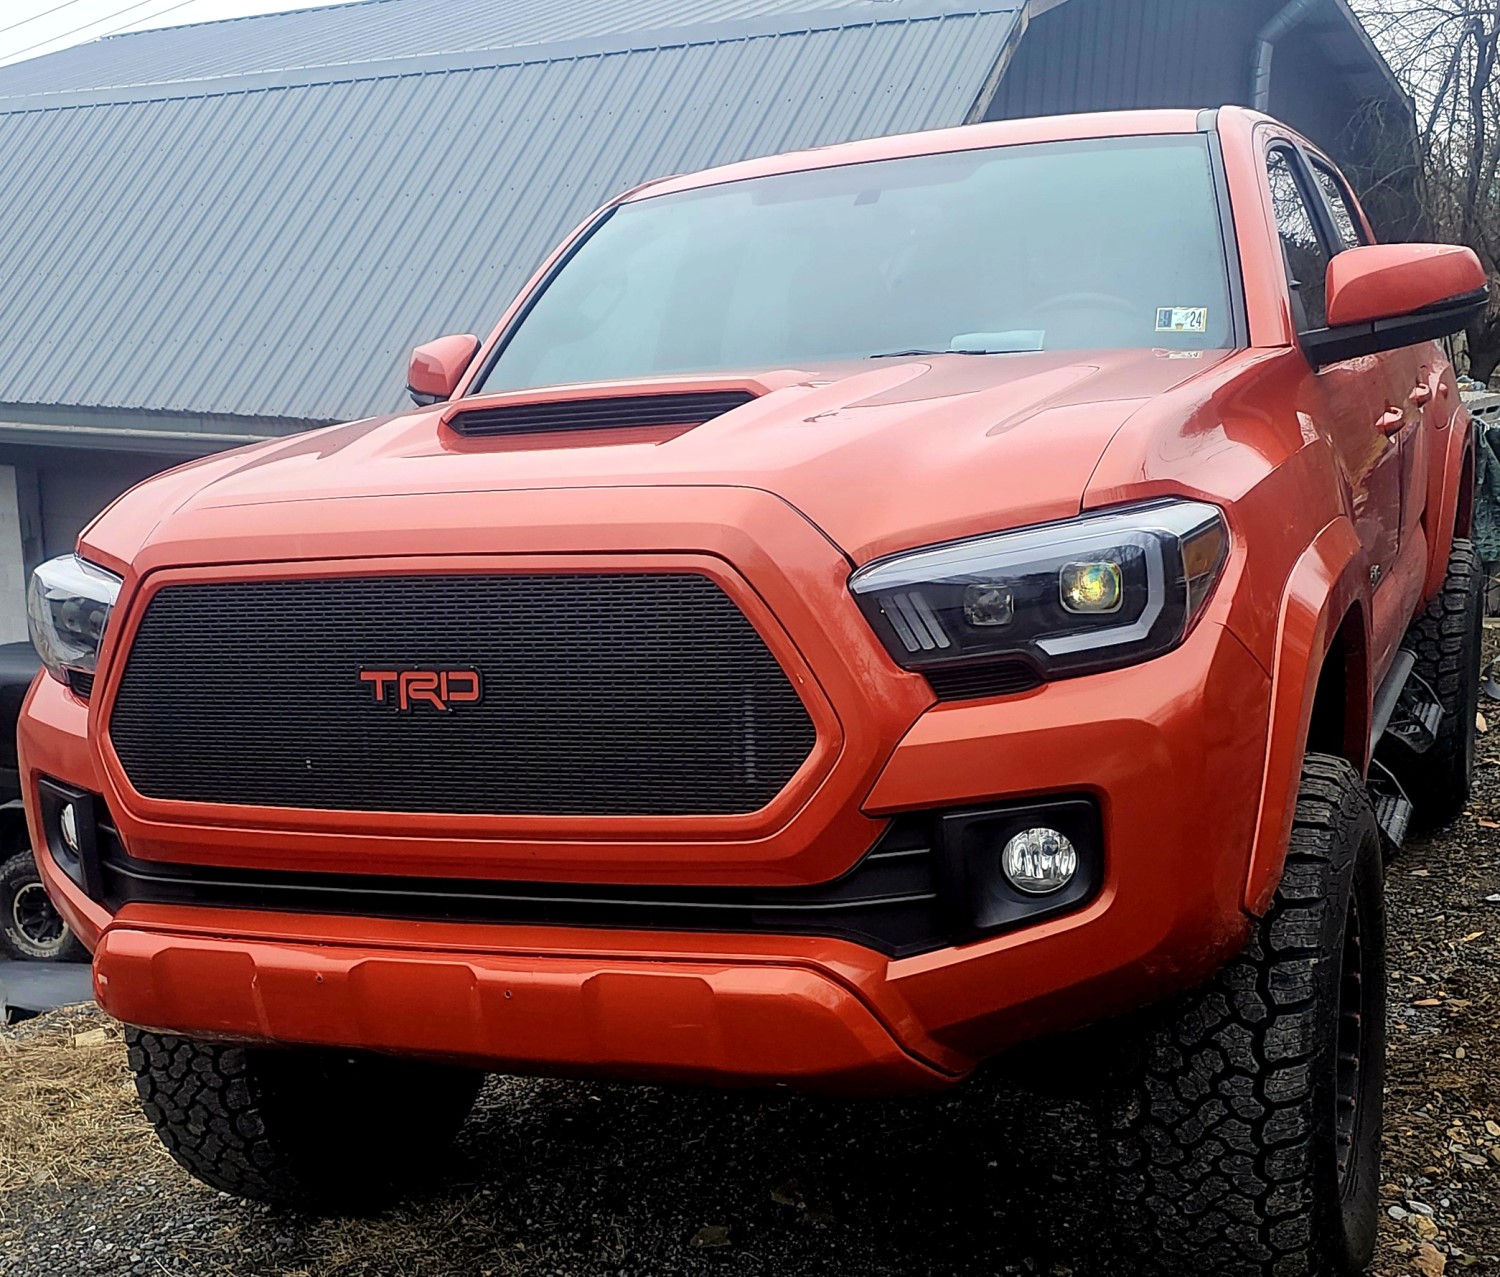 Custom Grilles are Heating Up - Inferno Tacoma Build so Hot it Could Melt Snow